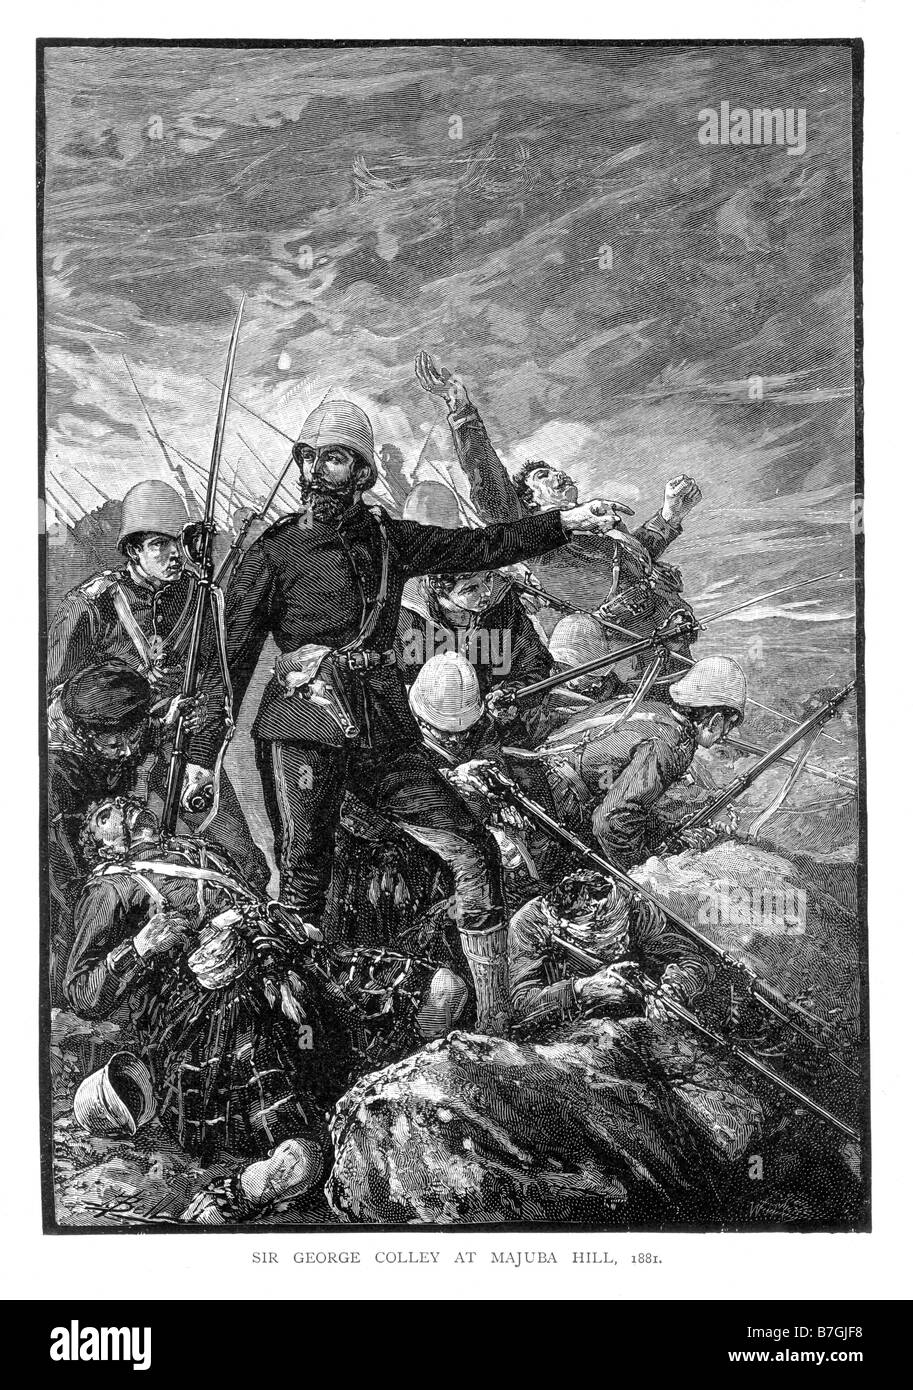 Major General Sir George Pomeroy Colley at the Battle of Majuba Hill During the First Boer War 27 February 1881 Illustration Stock Photo